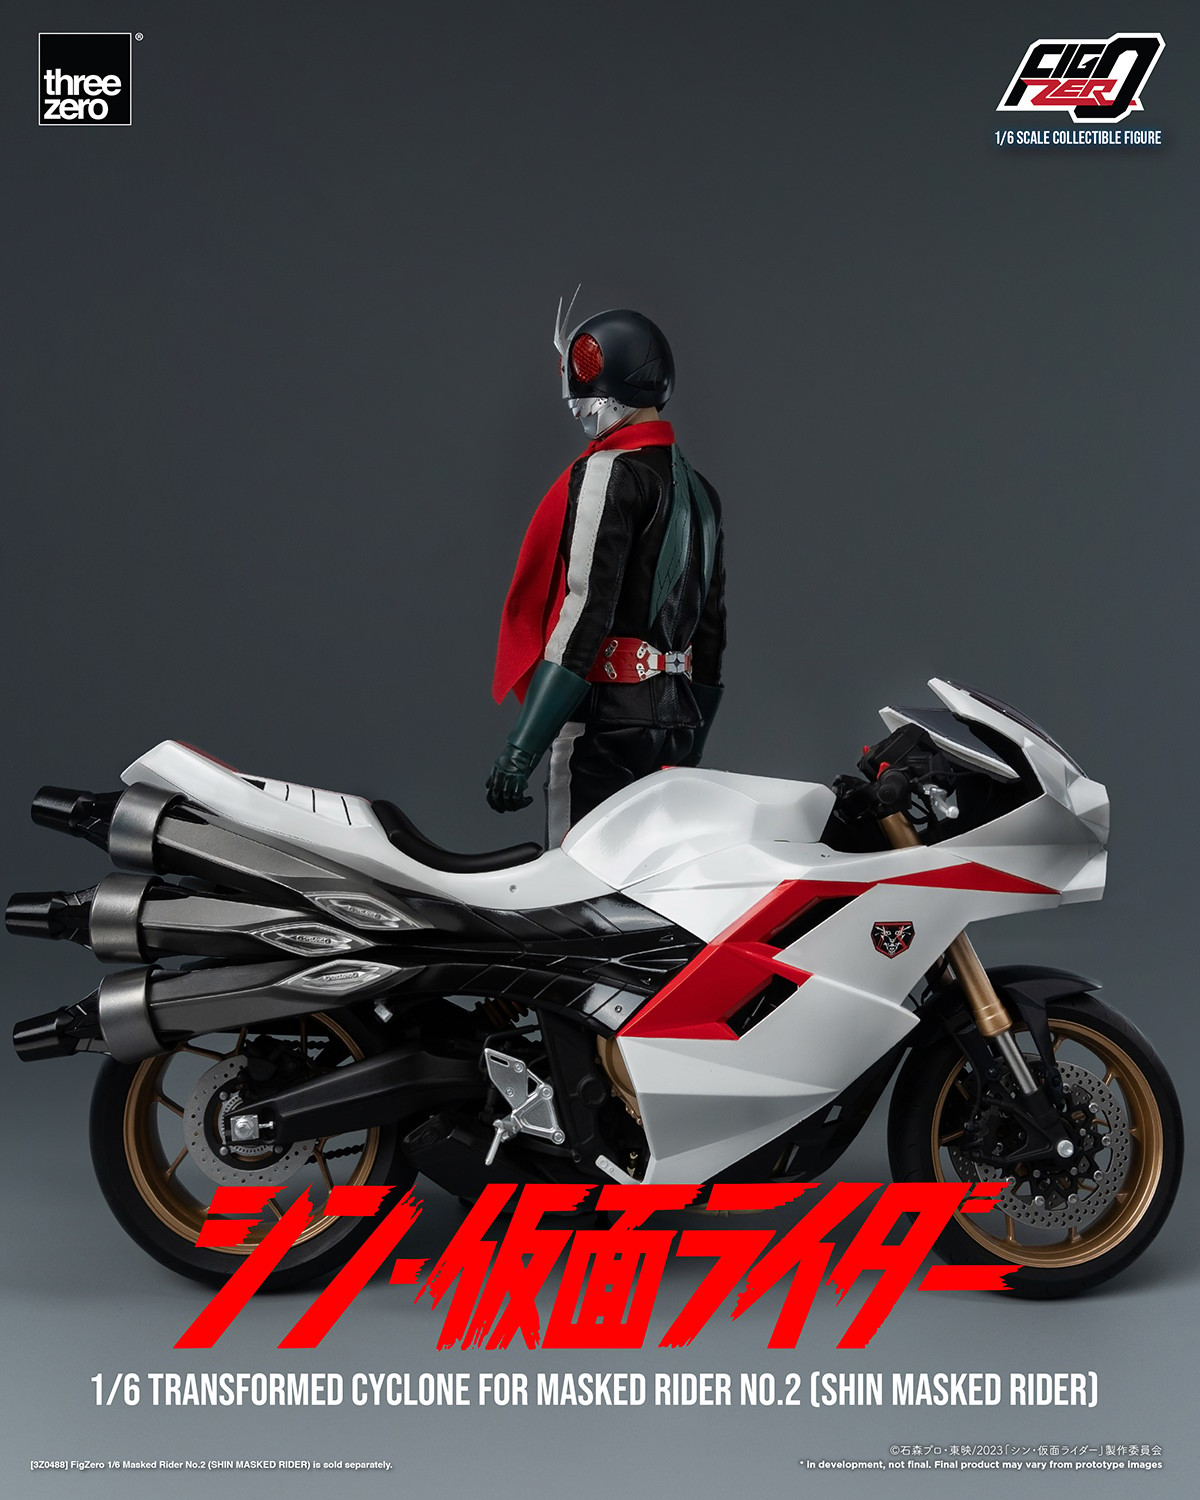 Transformed Cyclone for Masked Rider No. 2 (Shin Masked Rider) (Prototype Shown) View 10